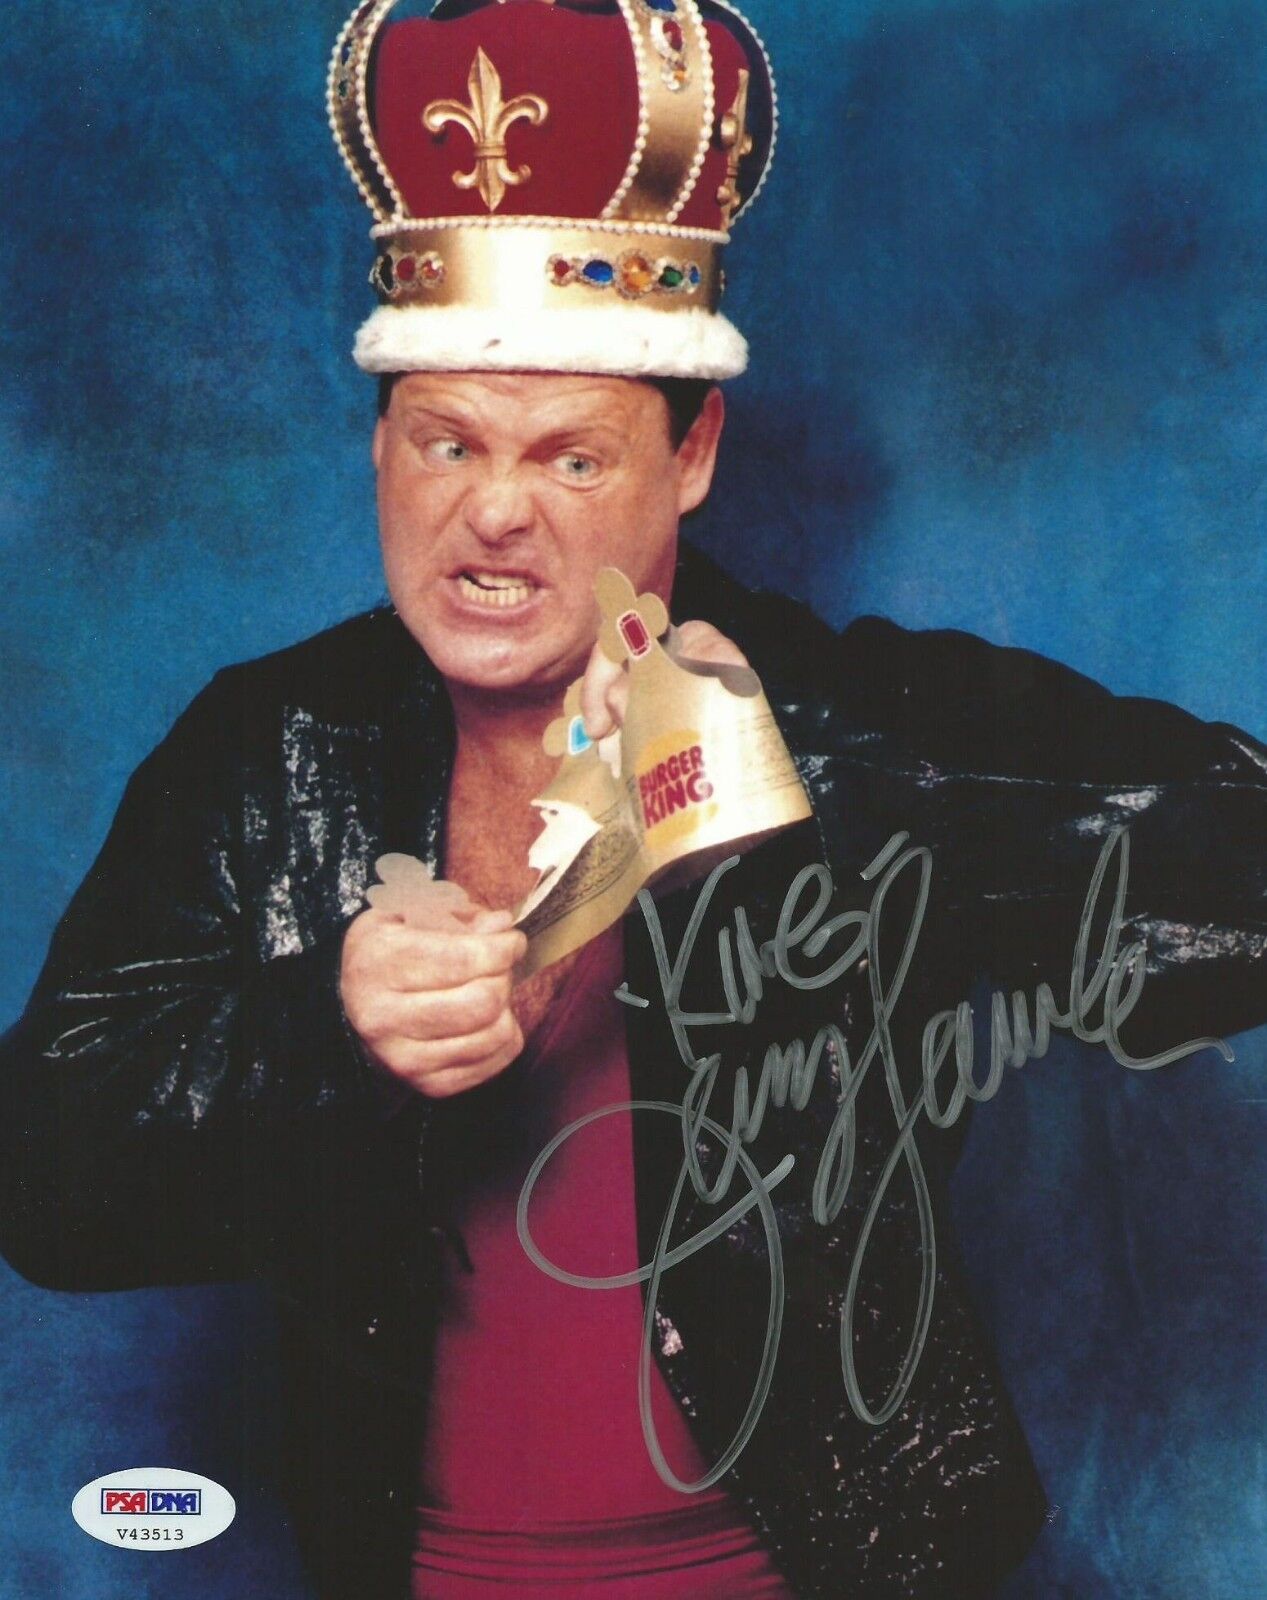 Jerry The King Lawler Signed WWE 8x10 Photo Poster painting PSA/DNA COA Picture Autograph WWF 2